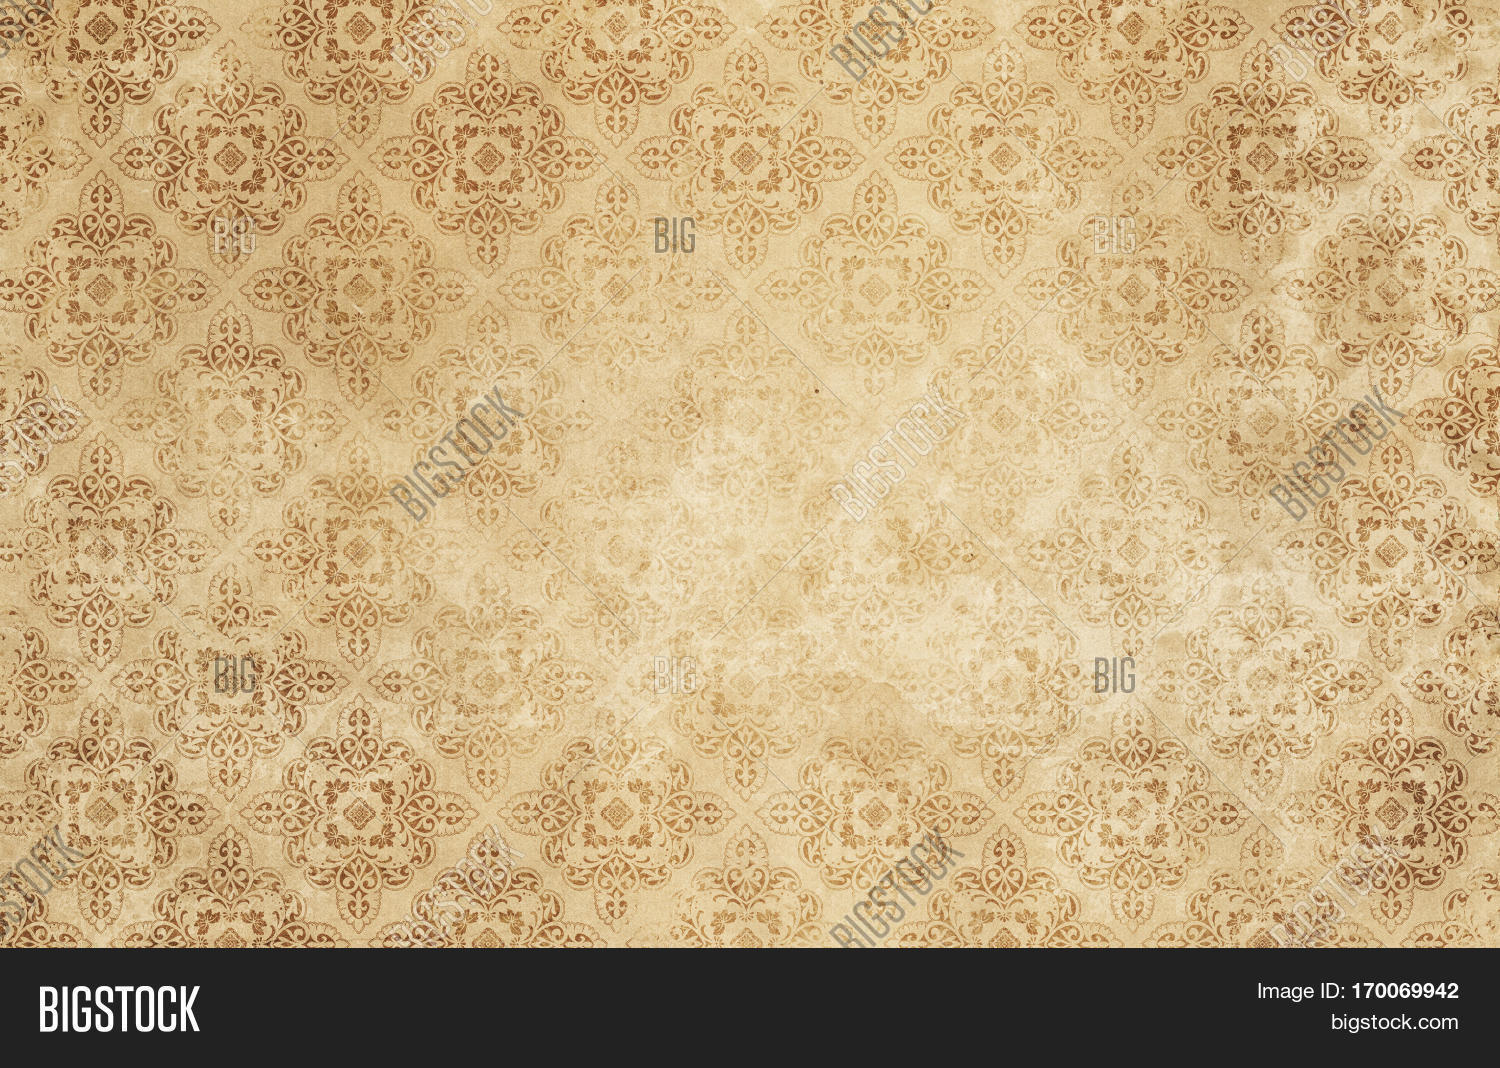 old fashioned wallpaper,text,brown,pattern,beige,wallpaper